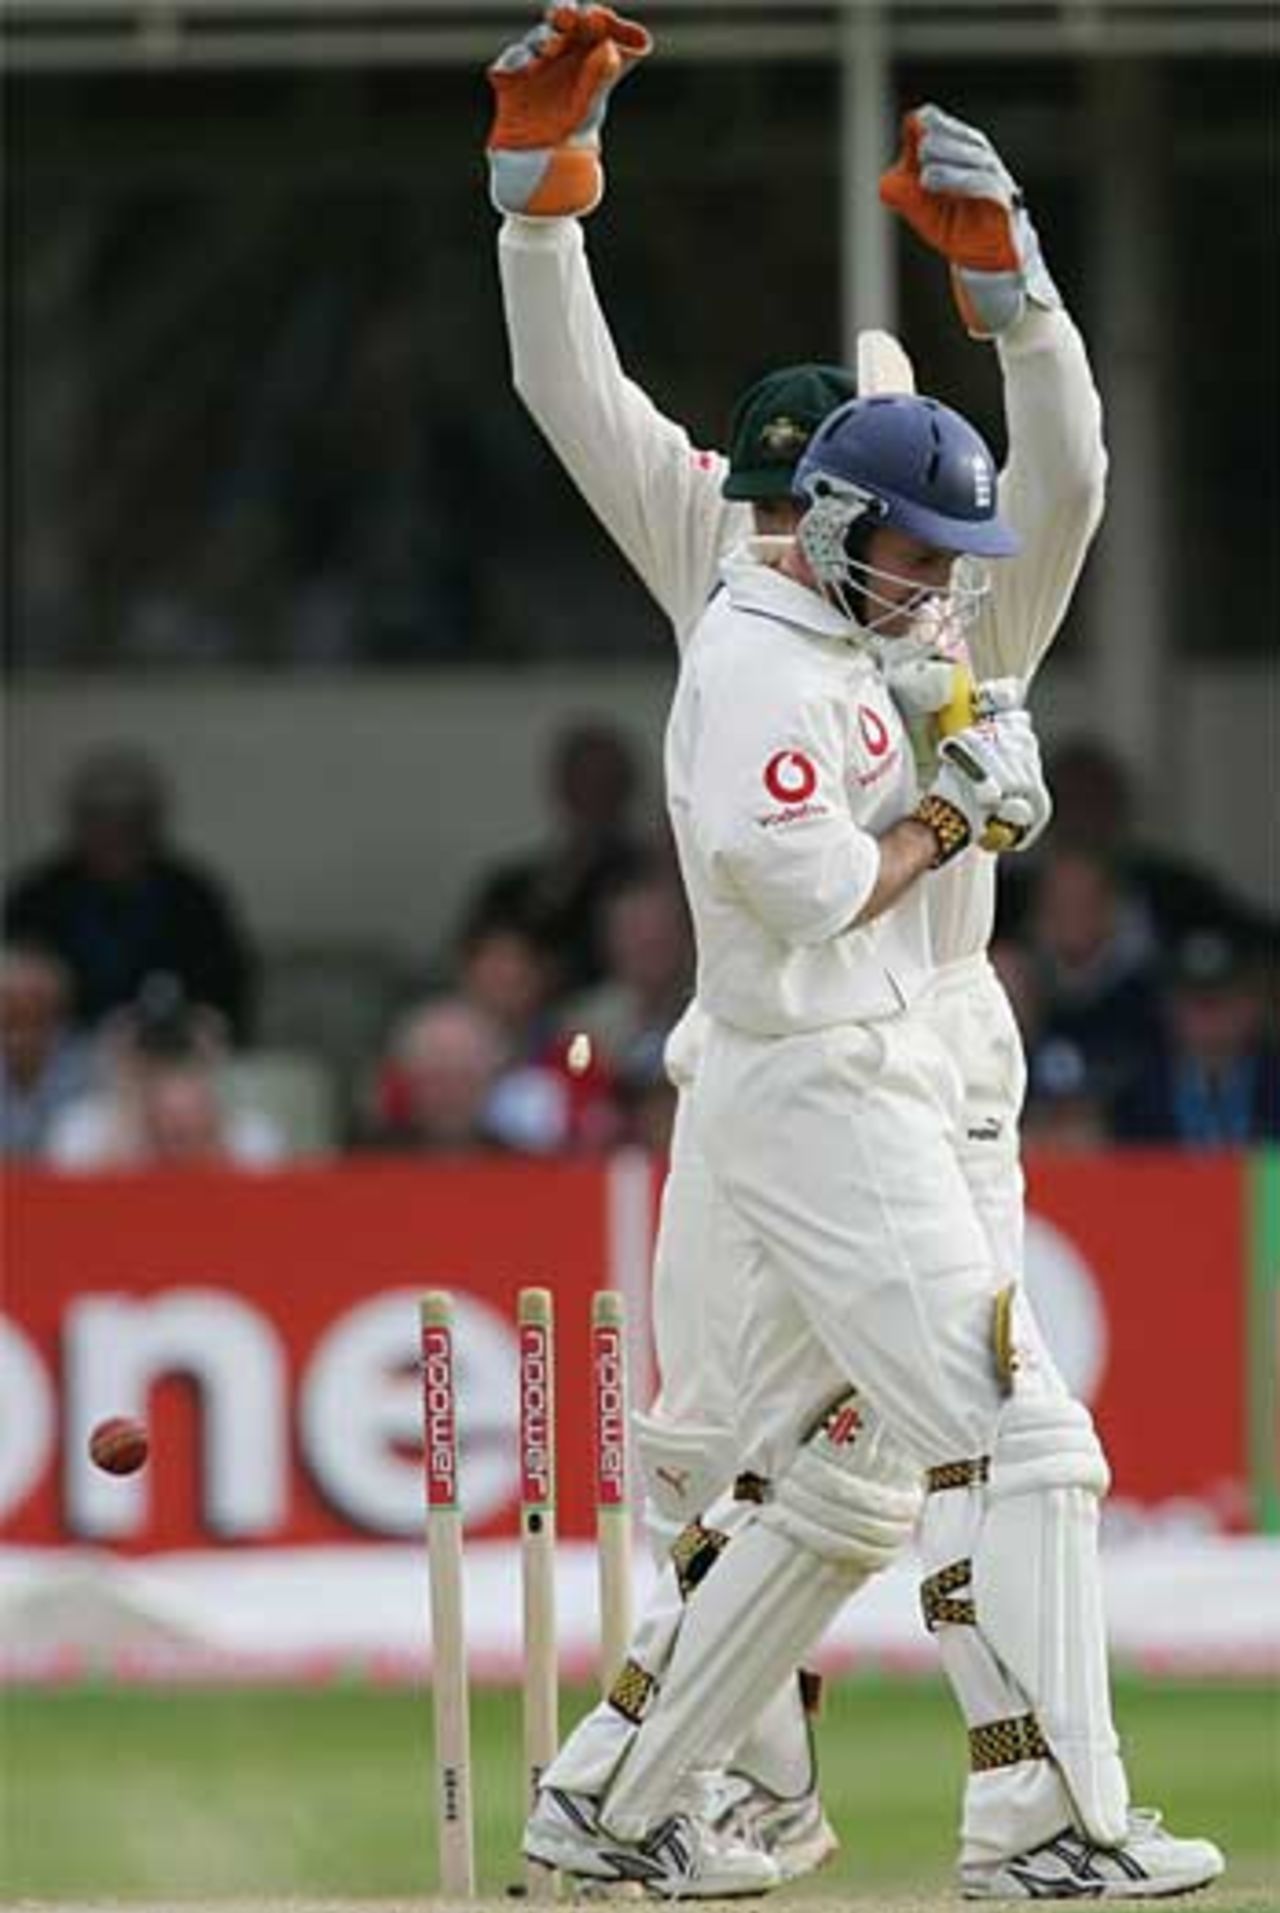 Andrew Strauss is dismissed by a Warne wonder-ball as the close of play beckons, England v Australia, second day, second Test, Edgbaston, August 5, 2005